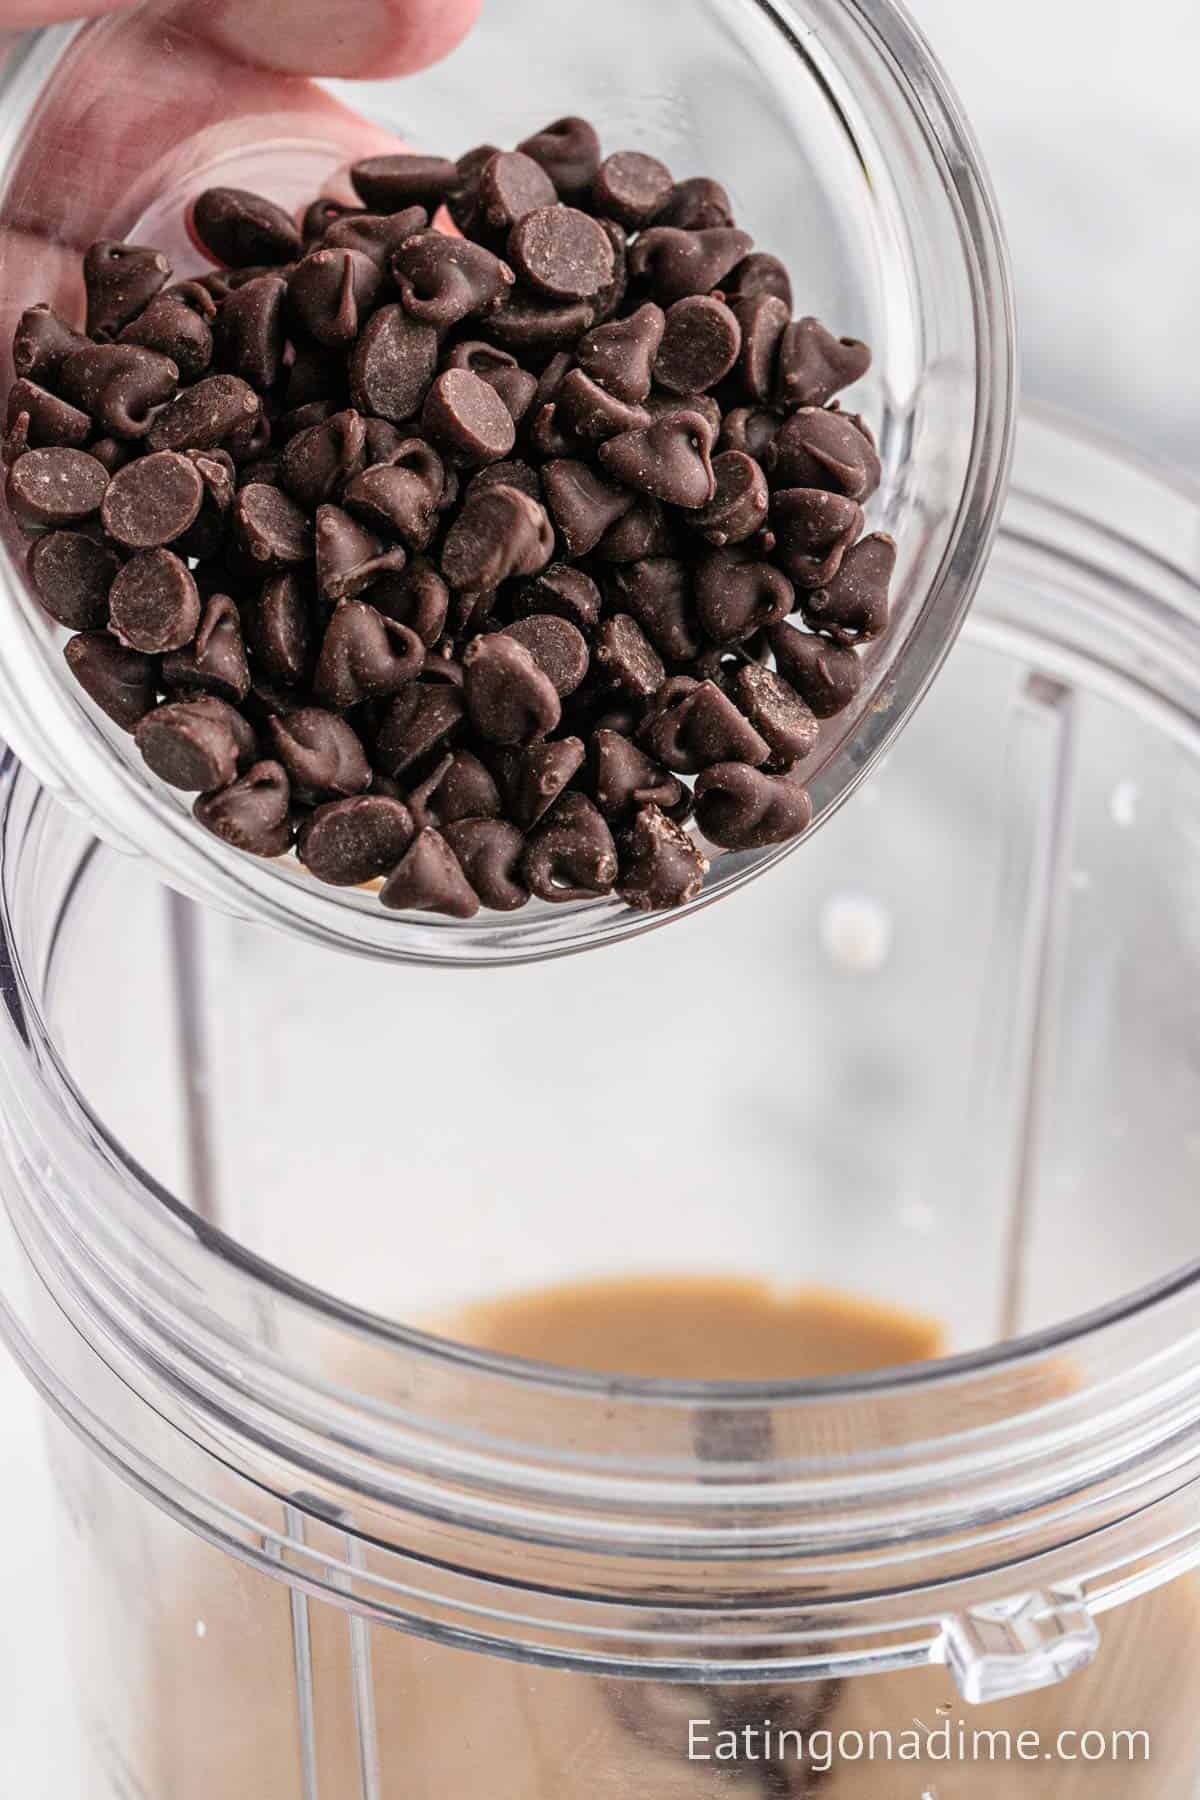 Pouring in chocolate chips into the coffee mixture in the blender cup